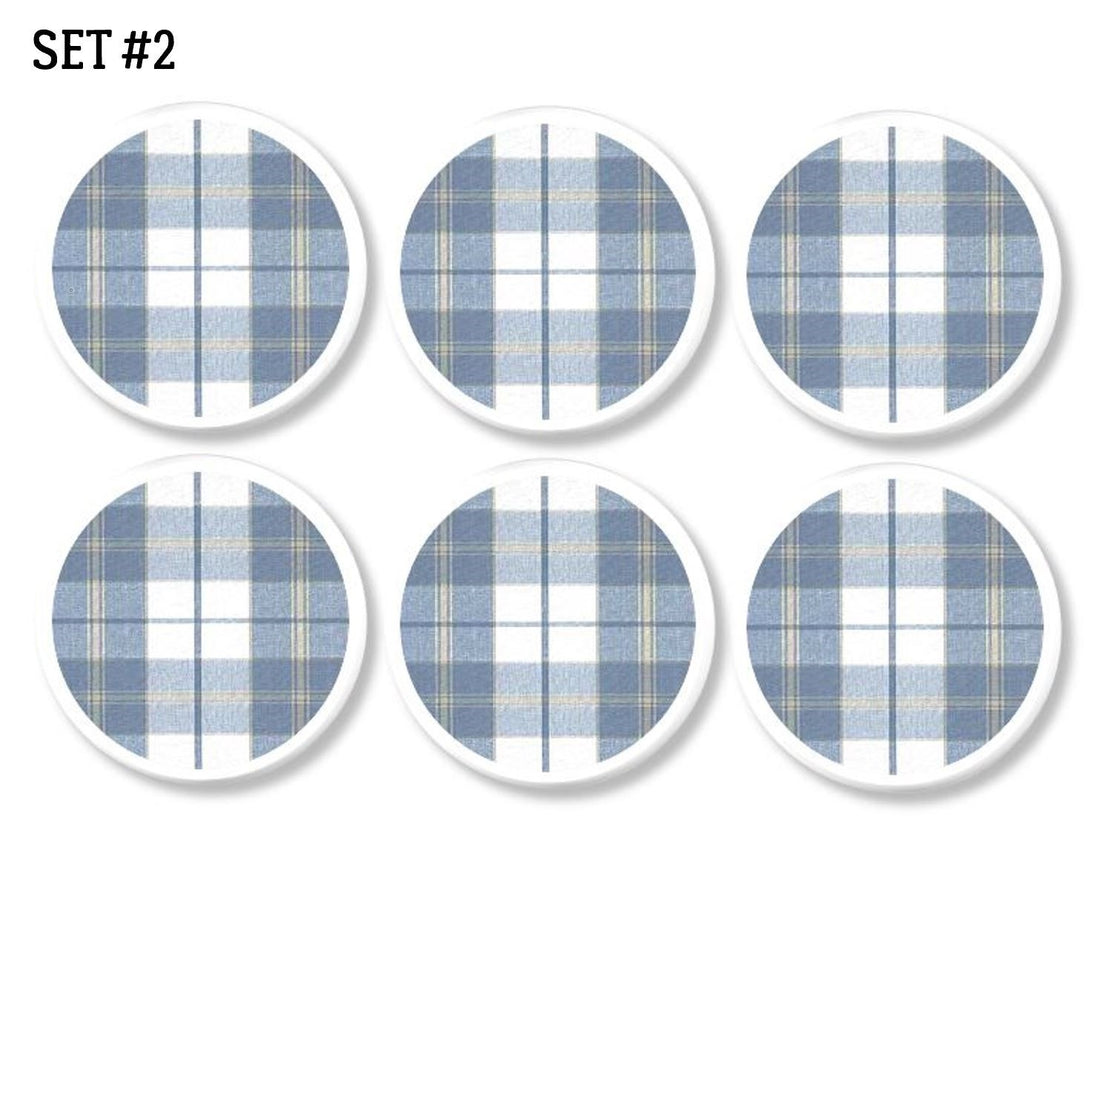 6 blue tartan plaid furniture door handles for baby boy nursery room. Soft stripe with pale yellow accent on white knob.